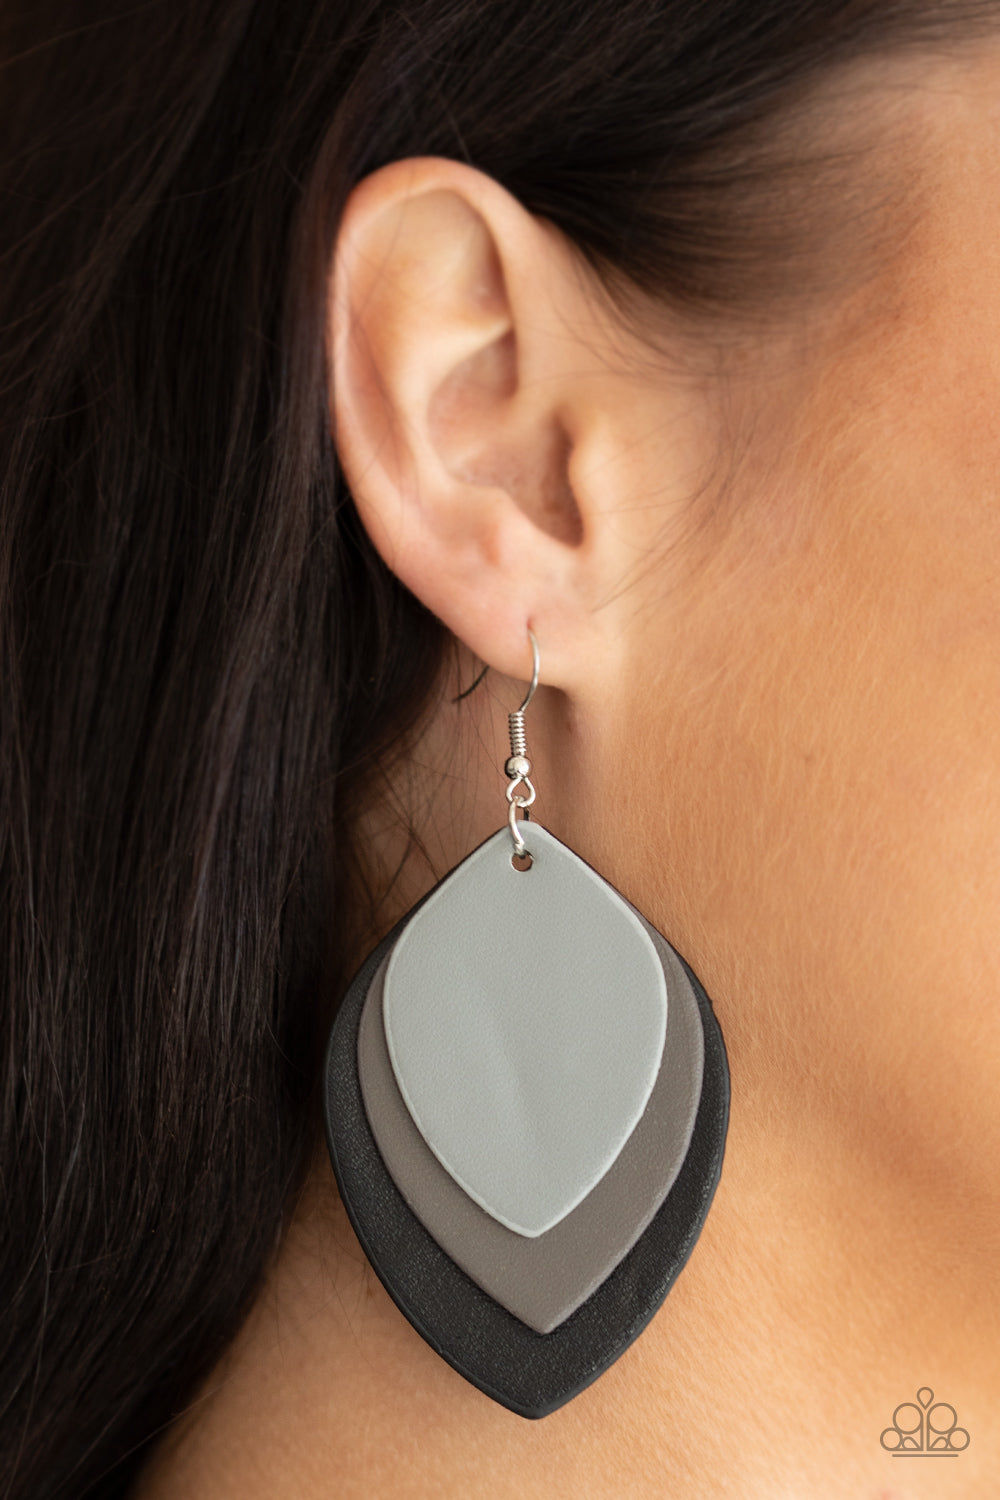 Paparazzi Jewelry & Accessories - Light as a LEATHER - Black Earrings. Bling By Titia Boutique